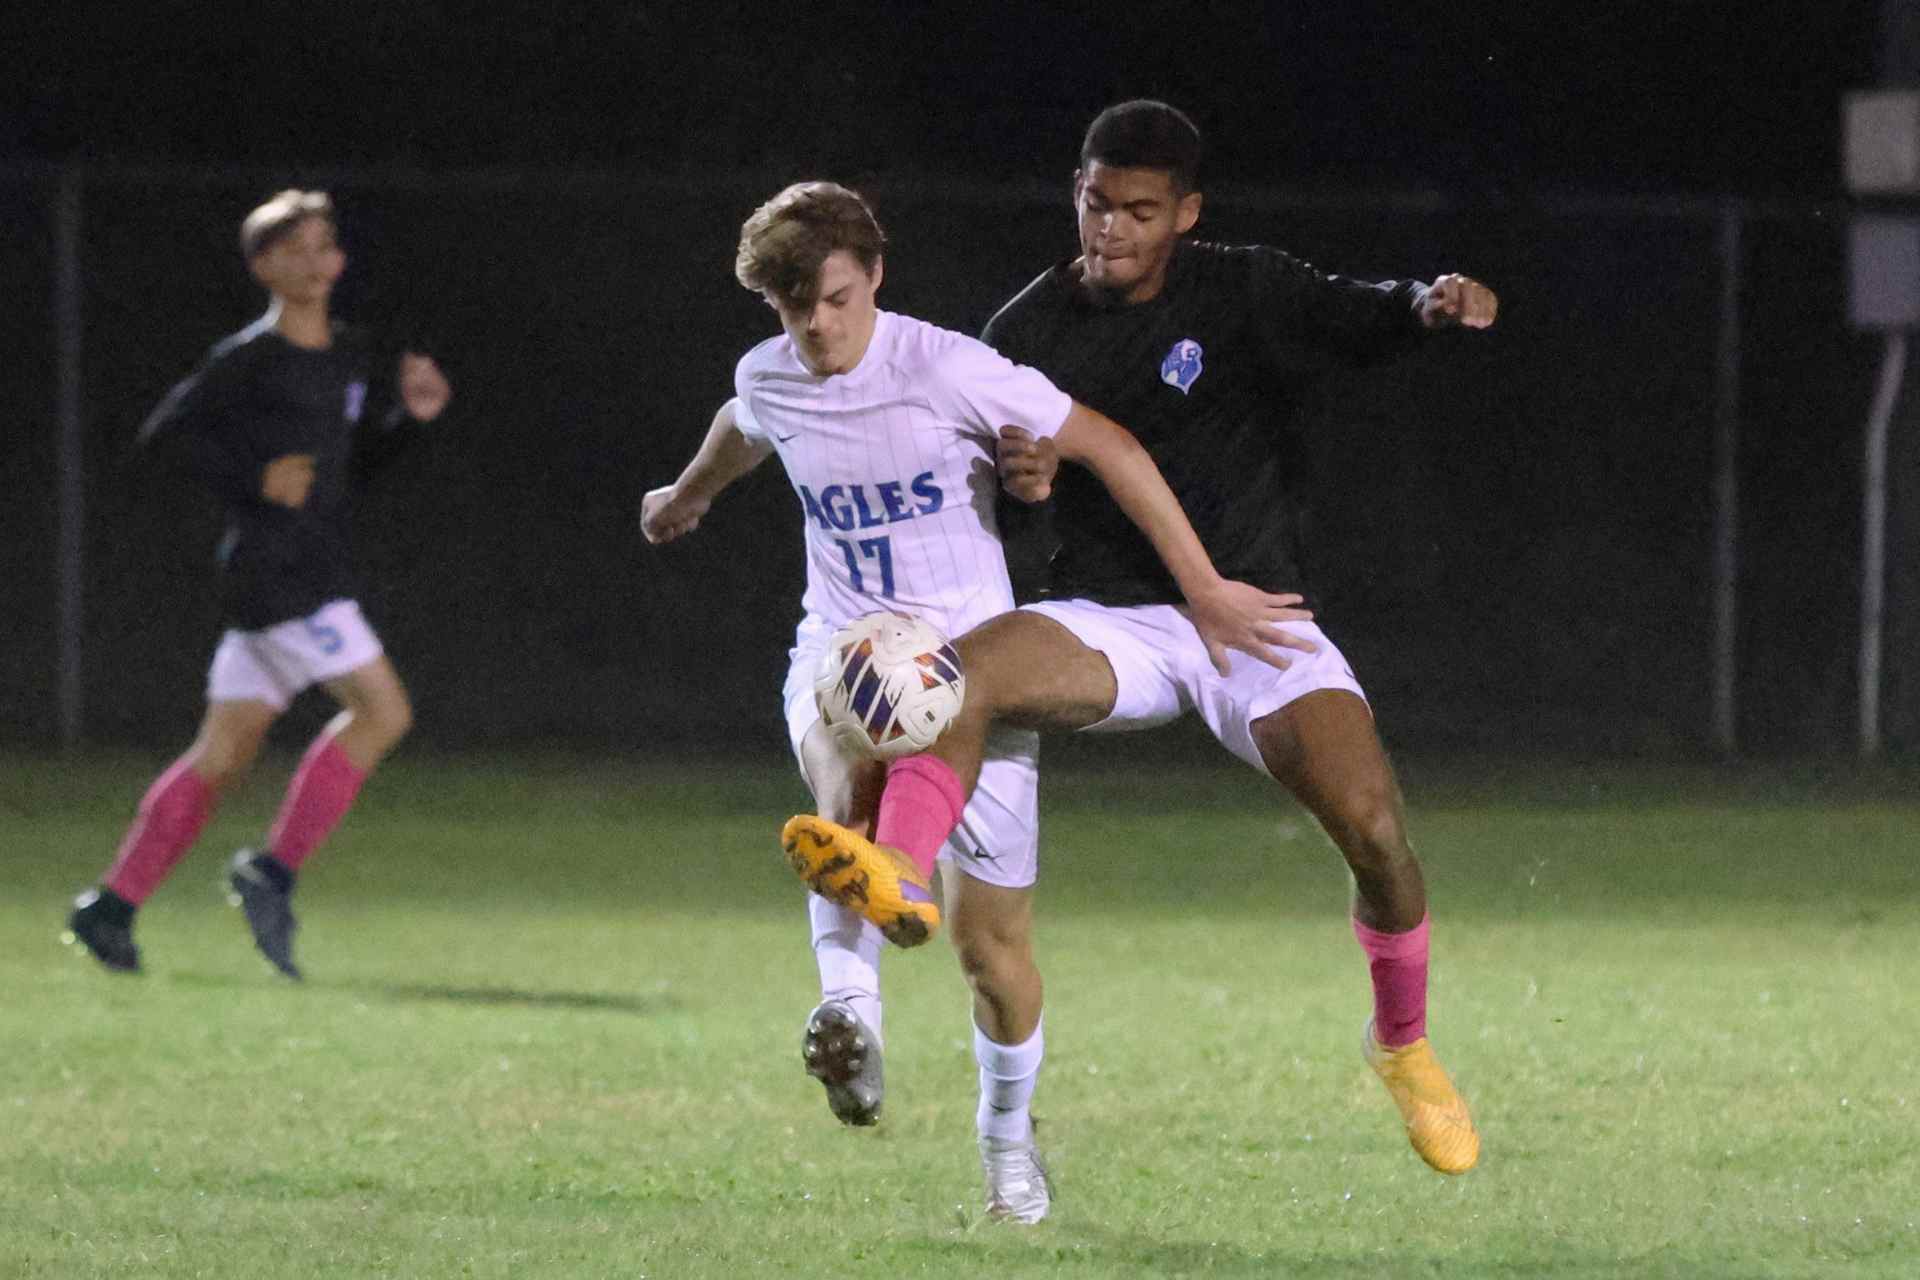 Buckhannon-Upshur's Tim Snyder and Robert C. Byrd's Jackson McKane battle for a loose ball during their contest Thursday night that ended in a 0-0 tie. (Bobbie Hatcher/My Buckhannon).